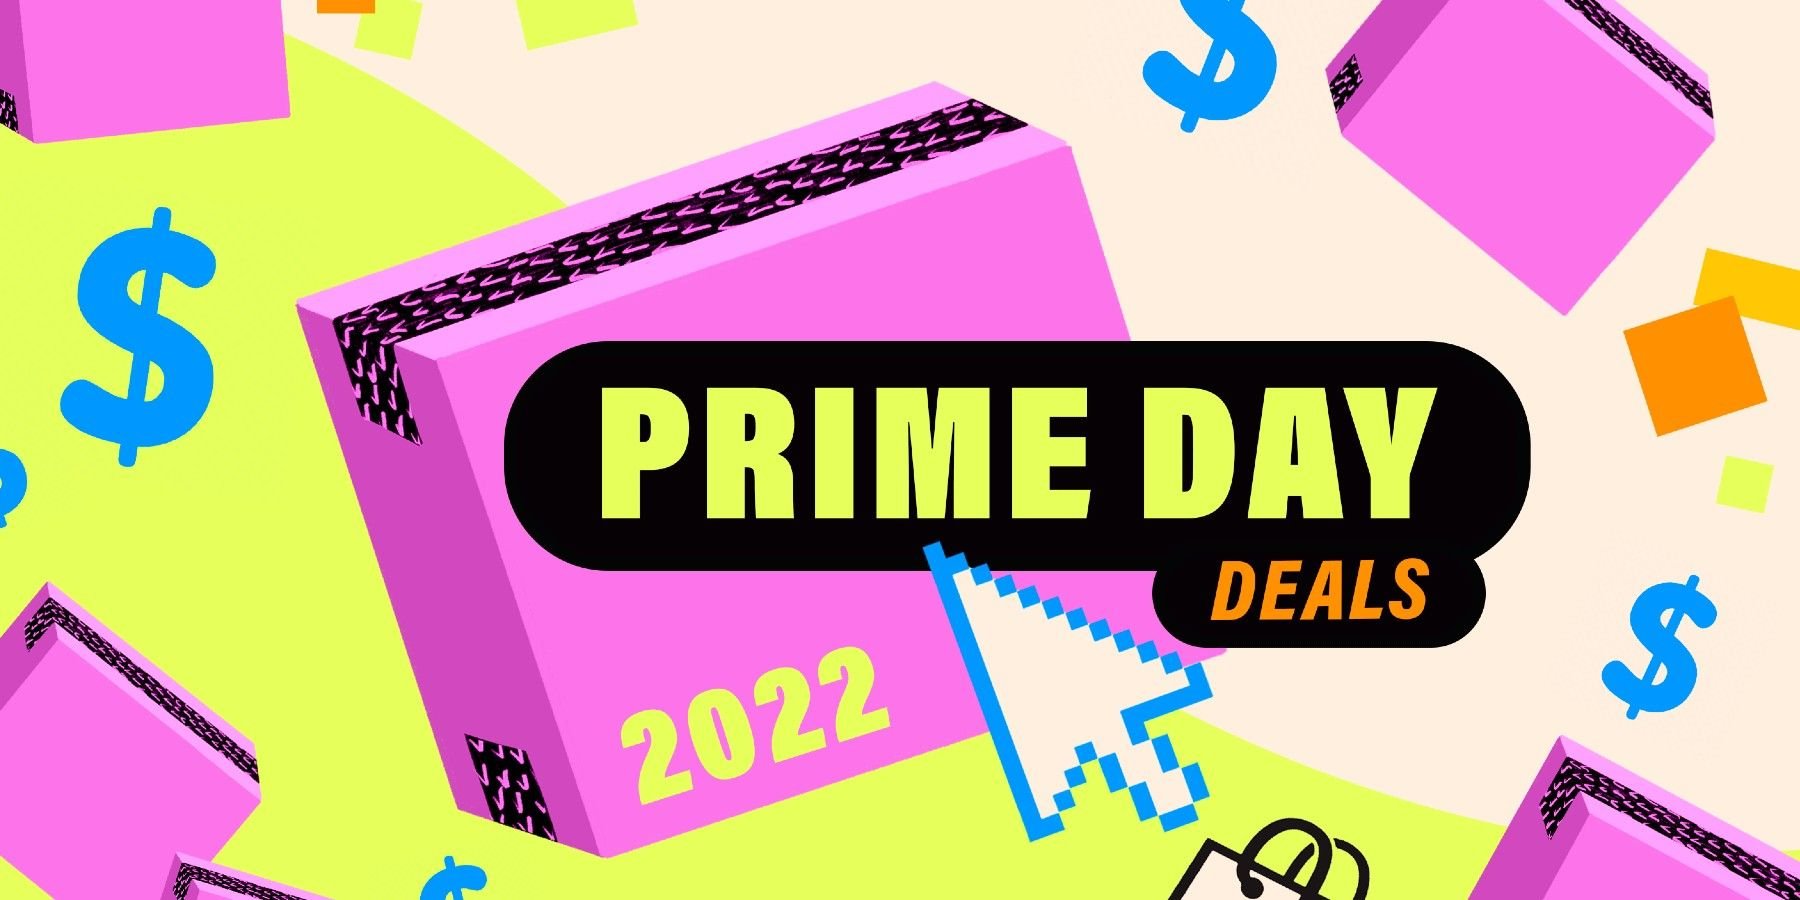 Get 30 Free Games With an Amazon Prime Free Trial During Prime Day